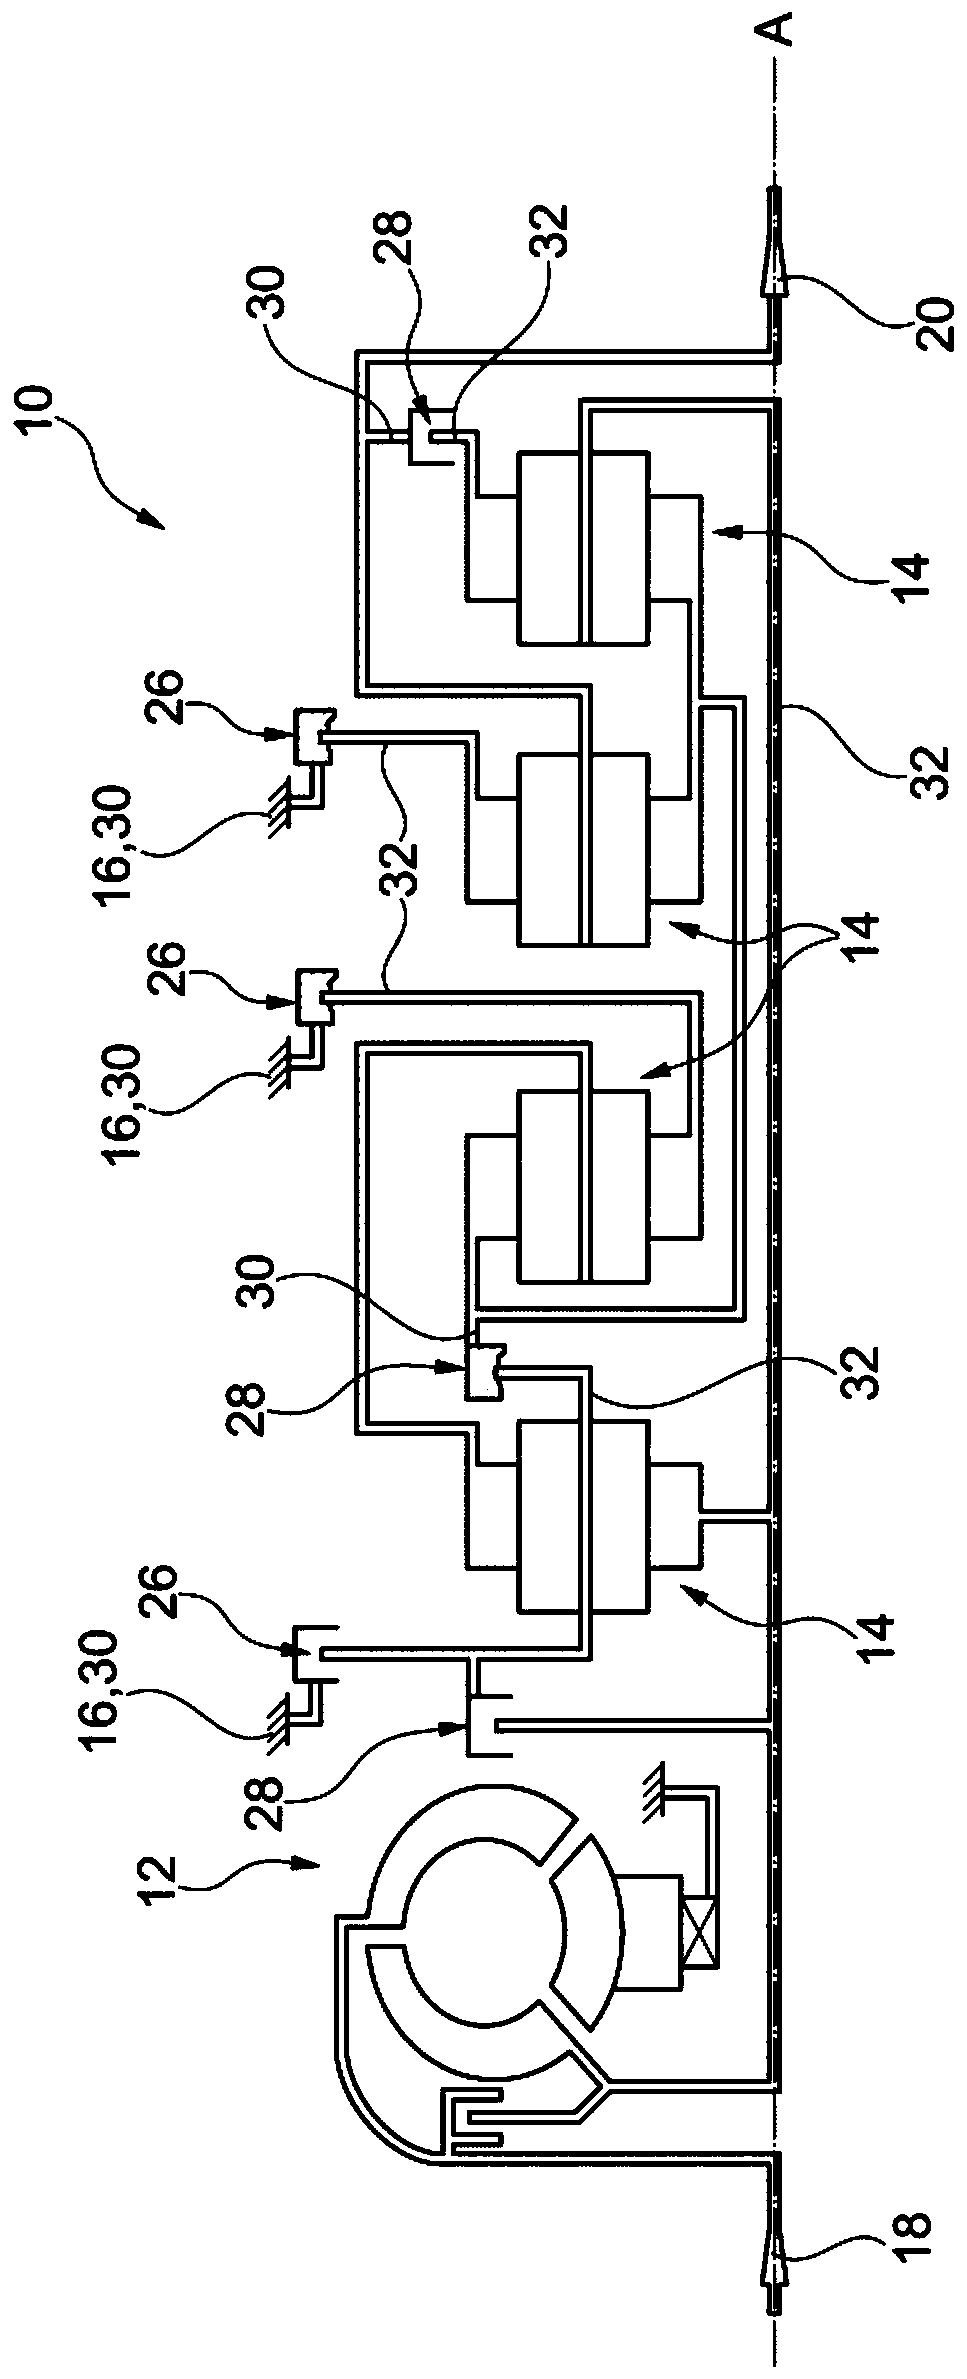 Shifting device for a motor vehicle transmission